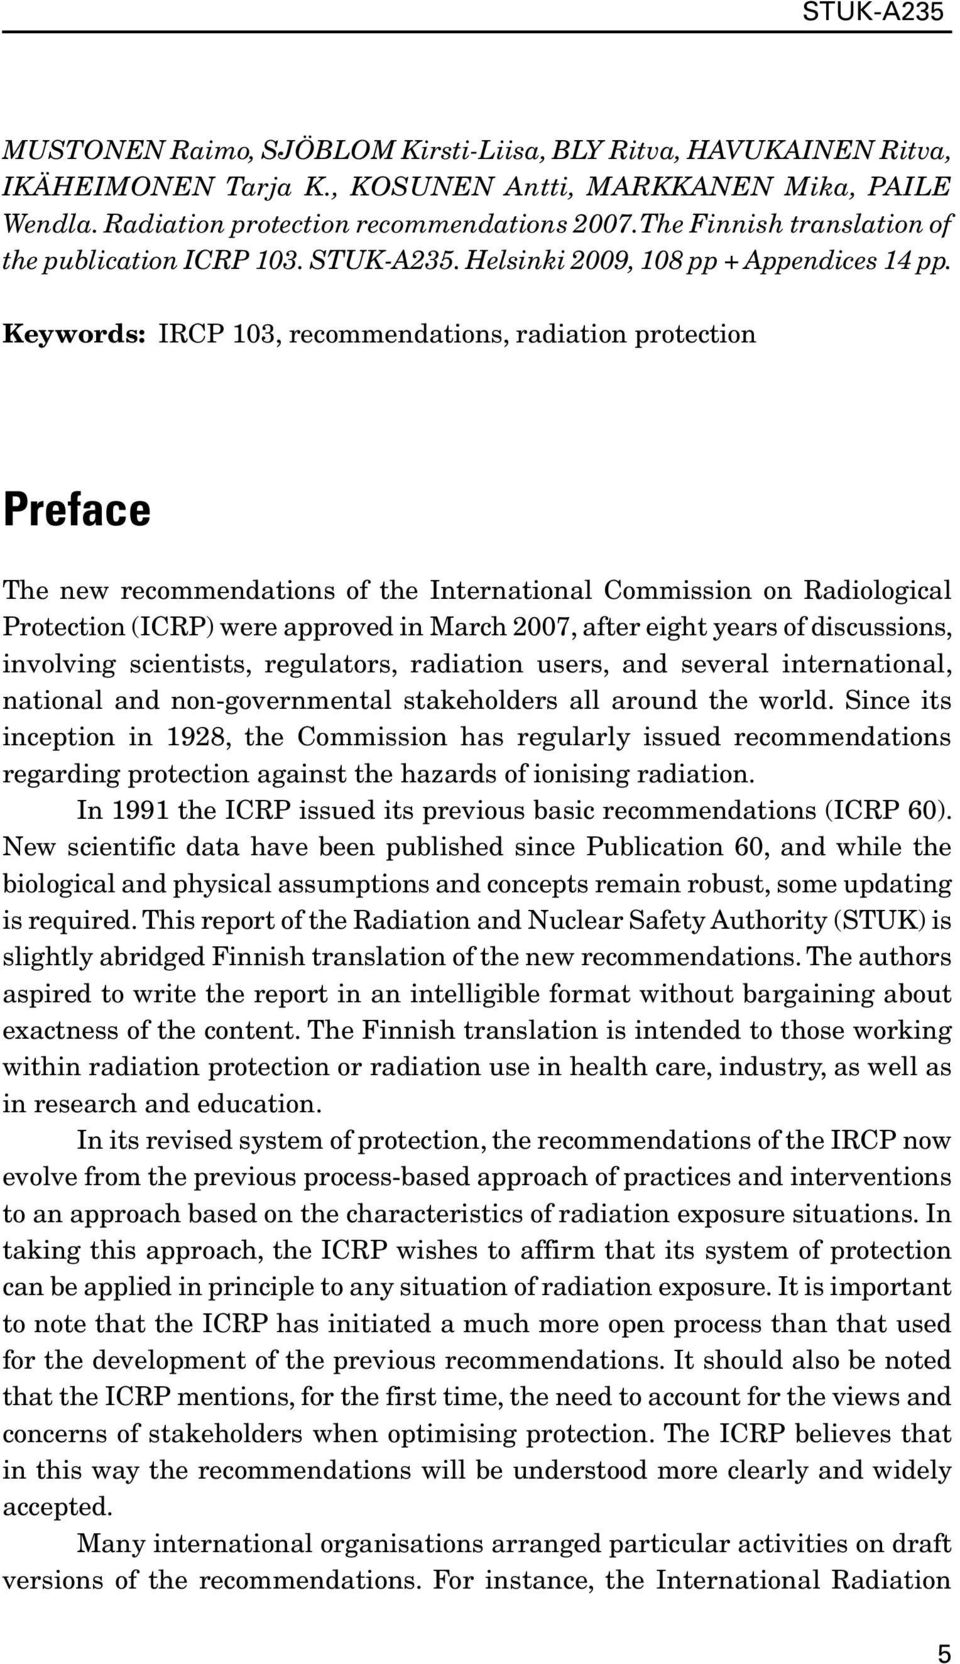 Keywords: IRCP 103, recommendations, radiation protection Preface The new recommendations of the International Commission on Radiological Protection (ICRP) were approved in March 2007, after eight